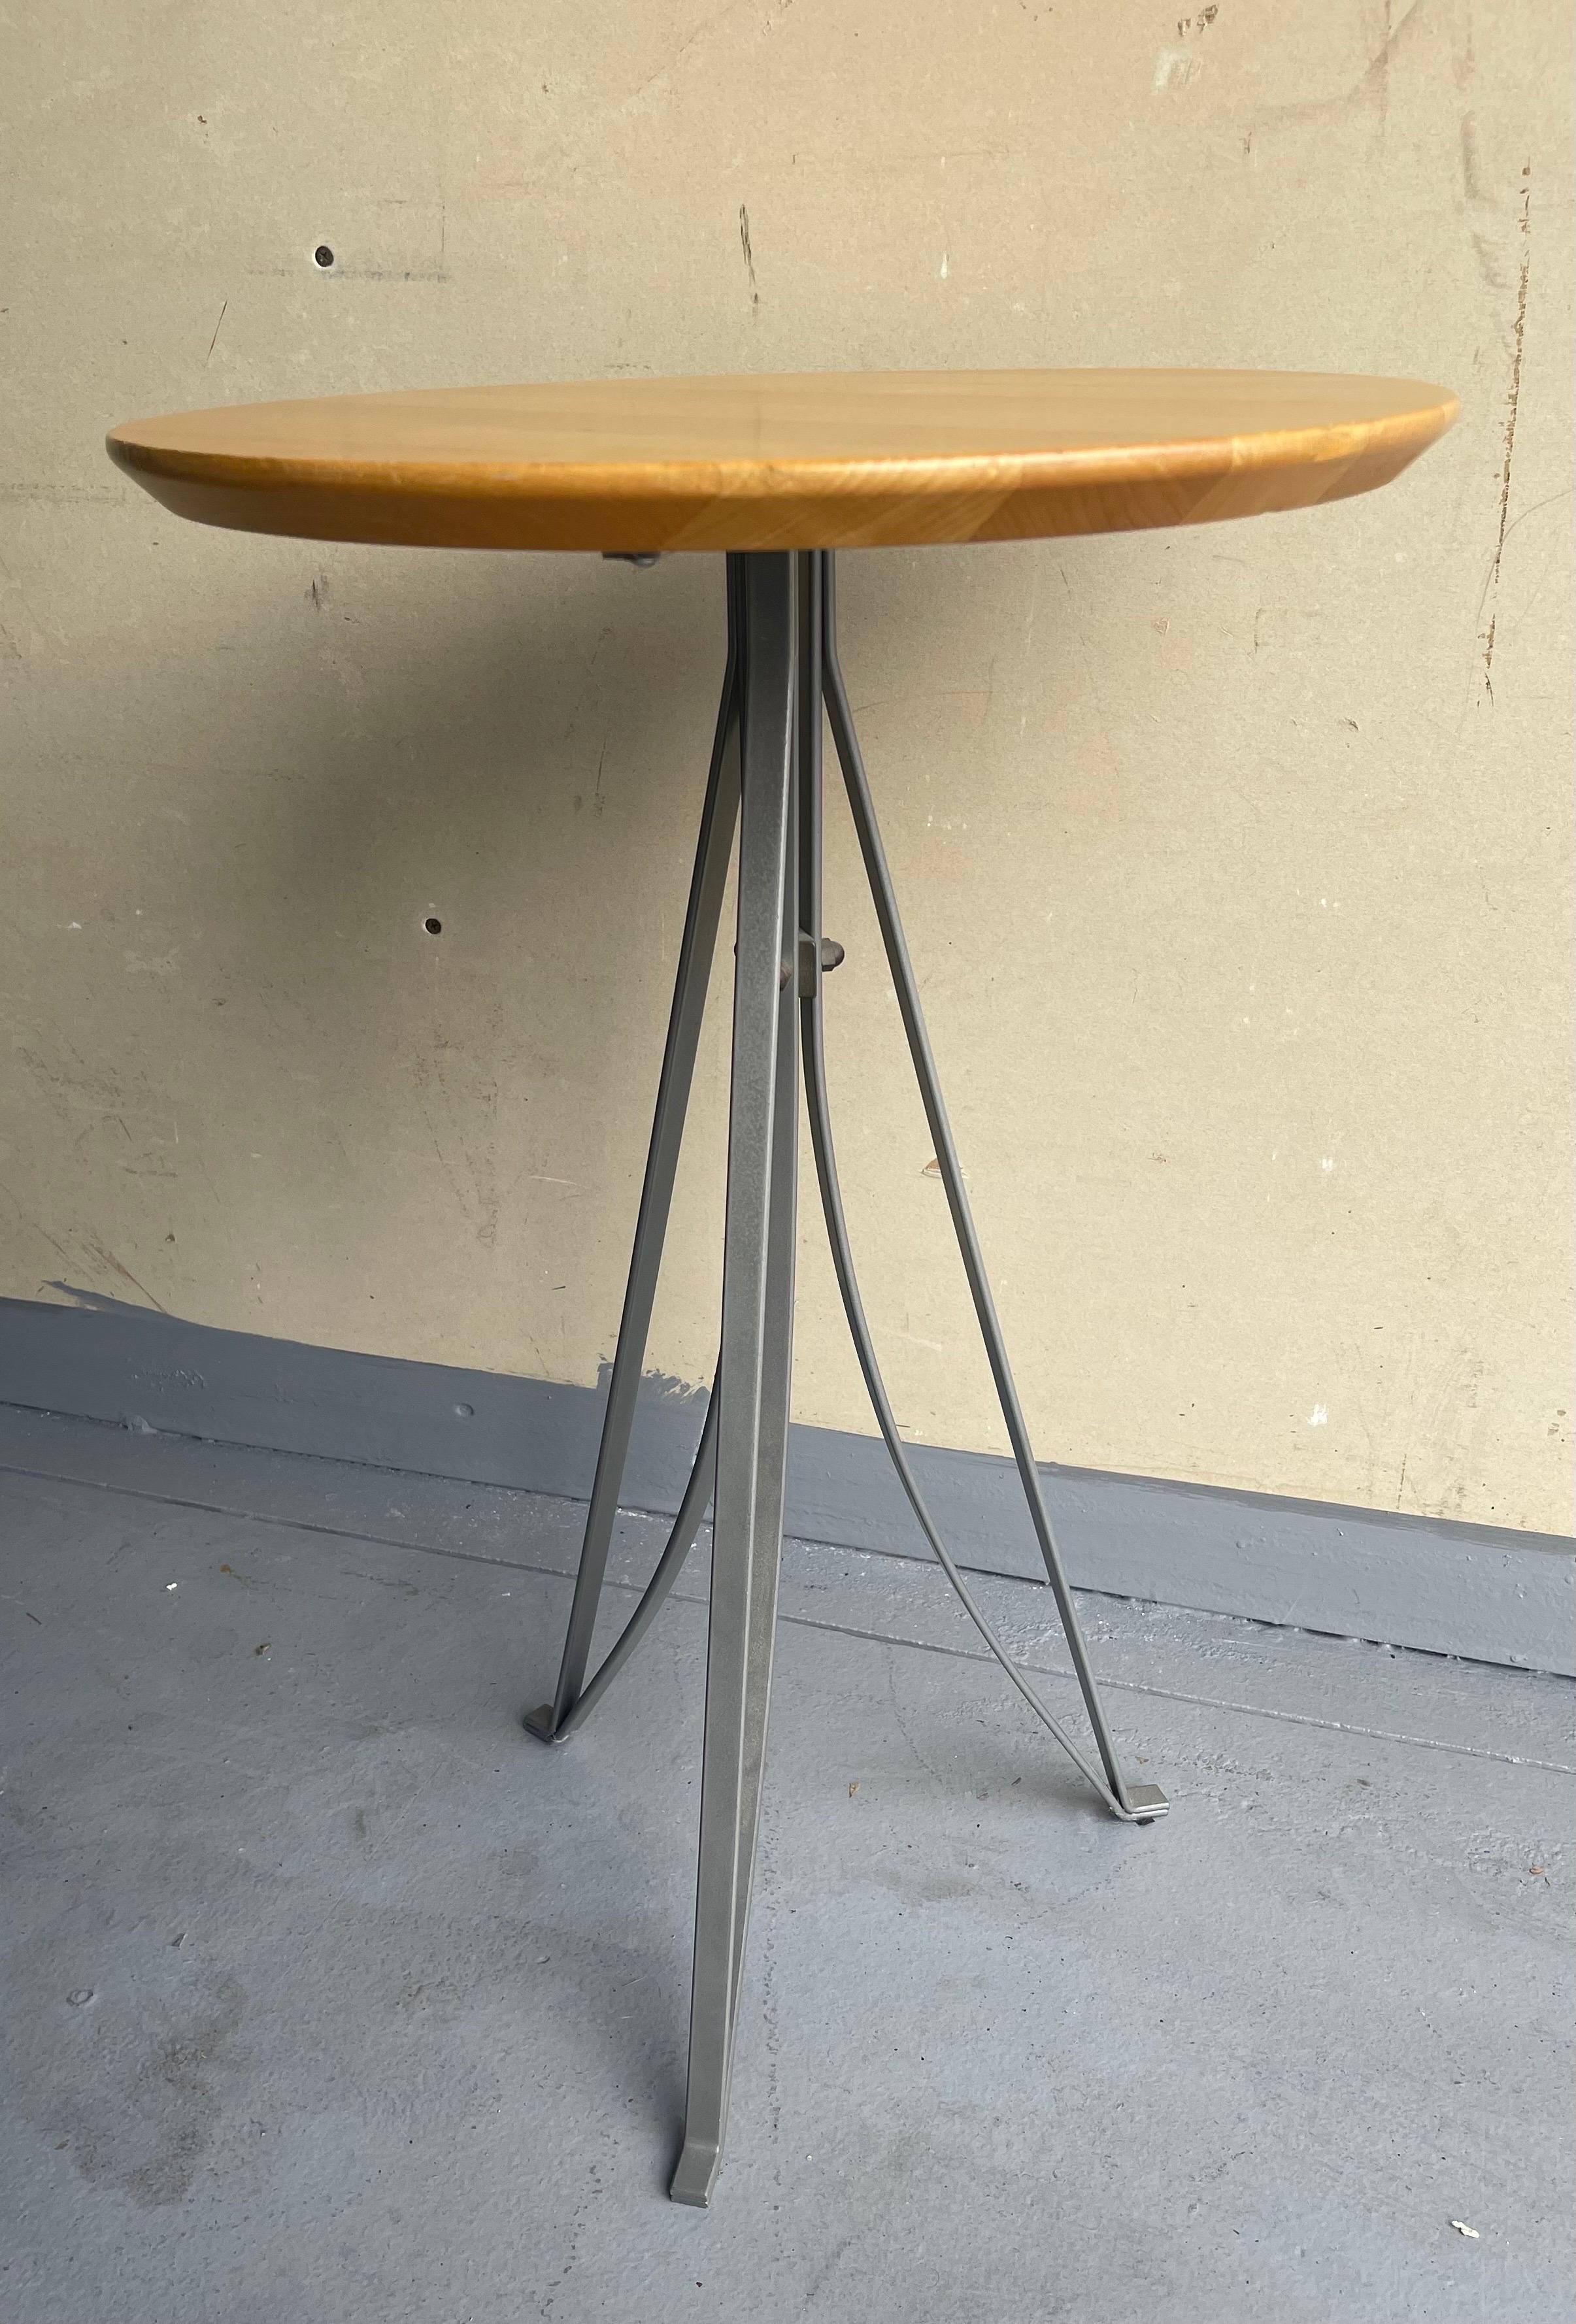 Vintage Industrial Side Table In Good Condition For Sale In San Diego, CA